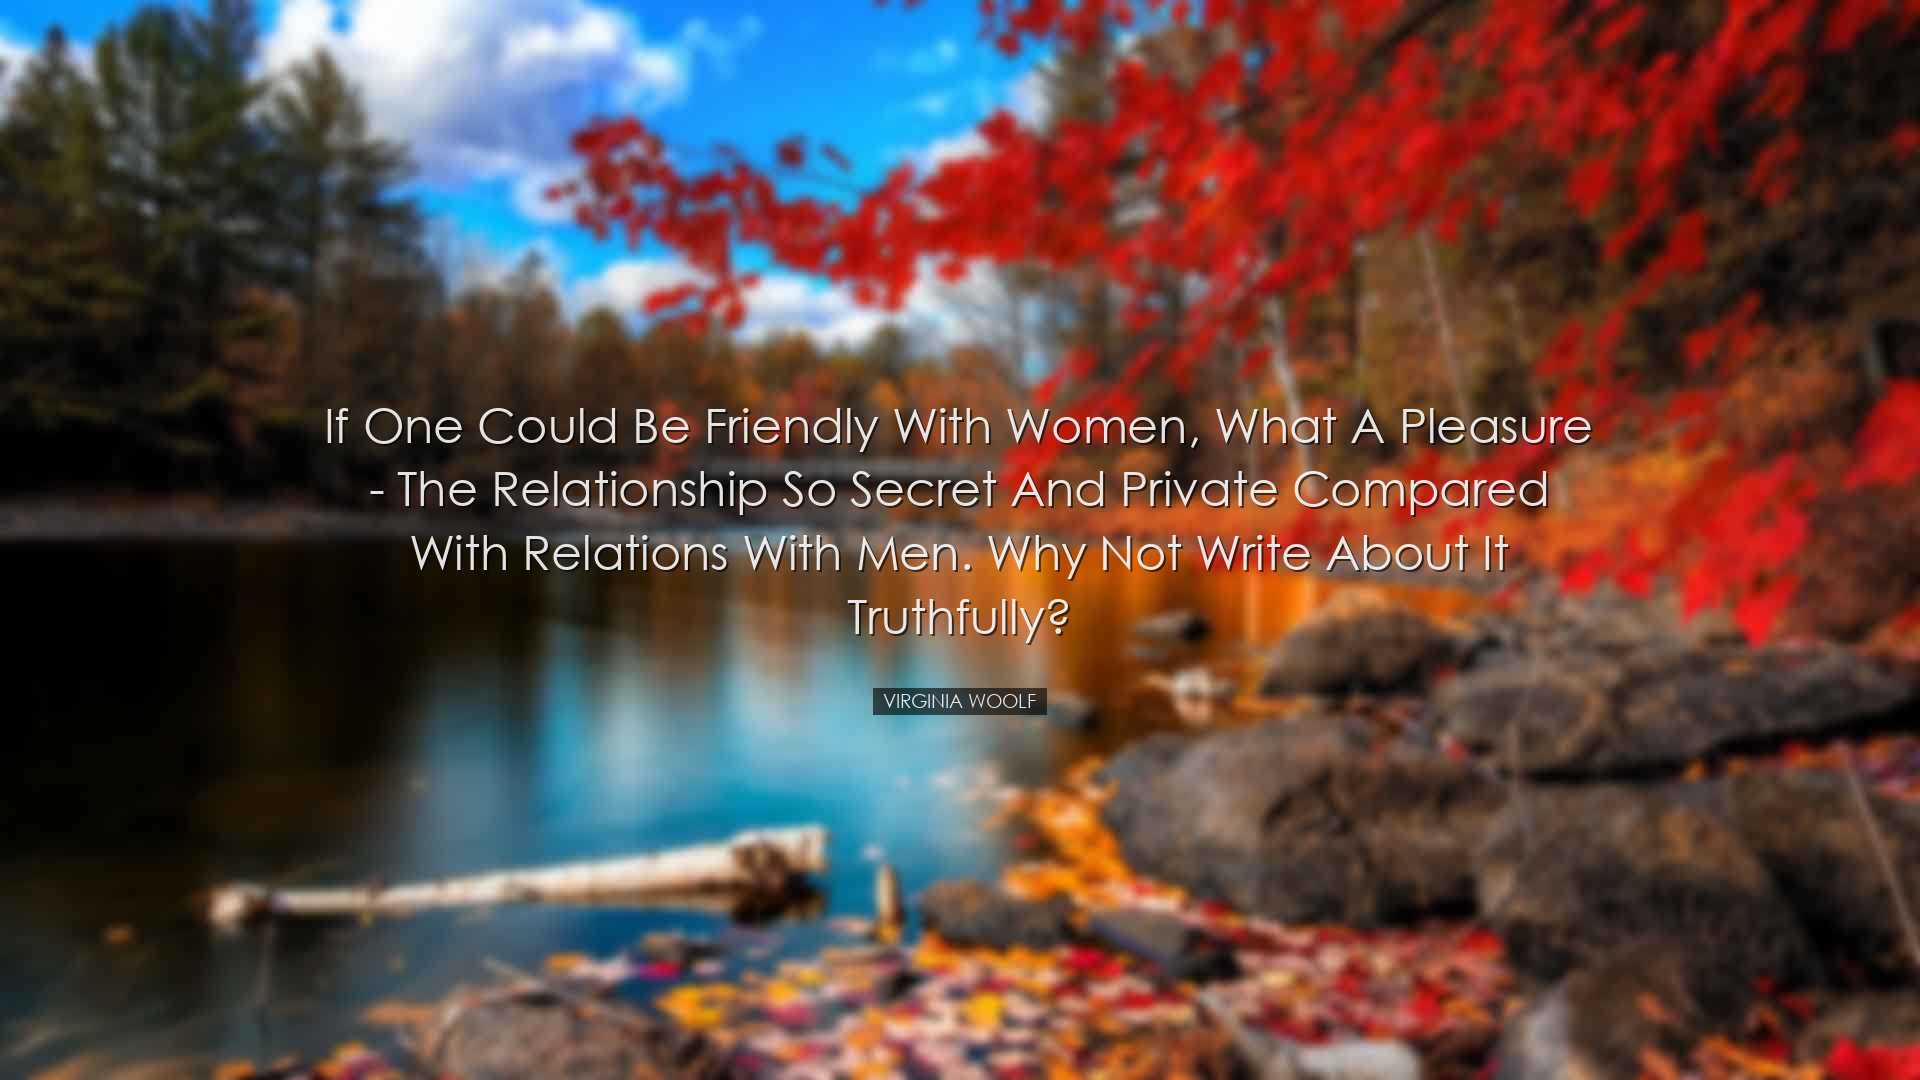 If one could be friendly with women, what a pleasure - the relatio